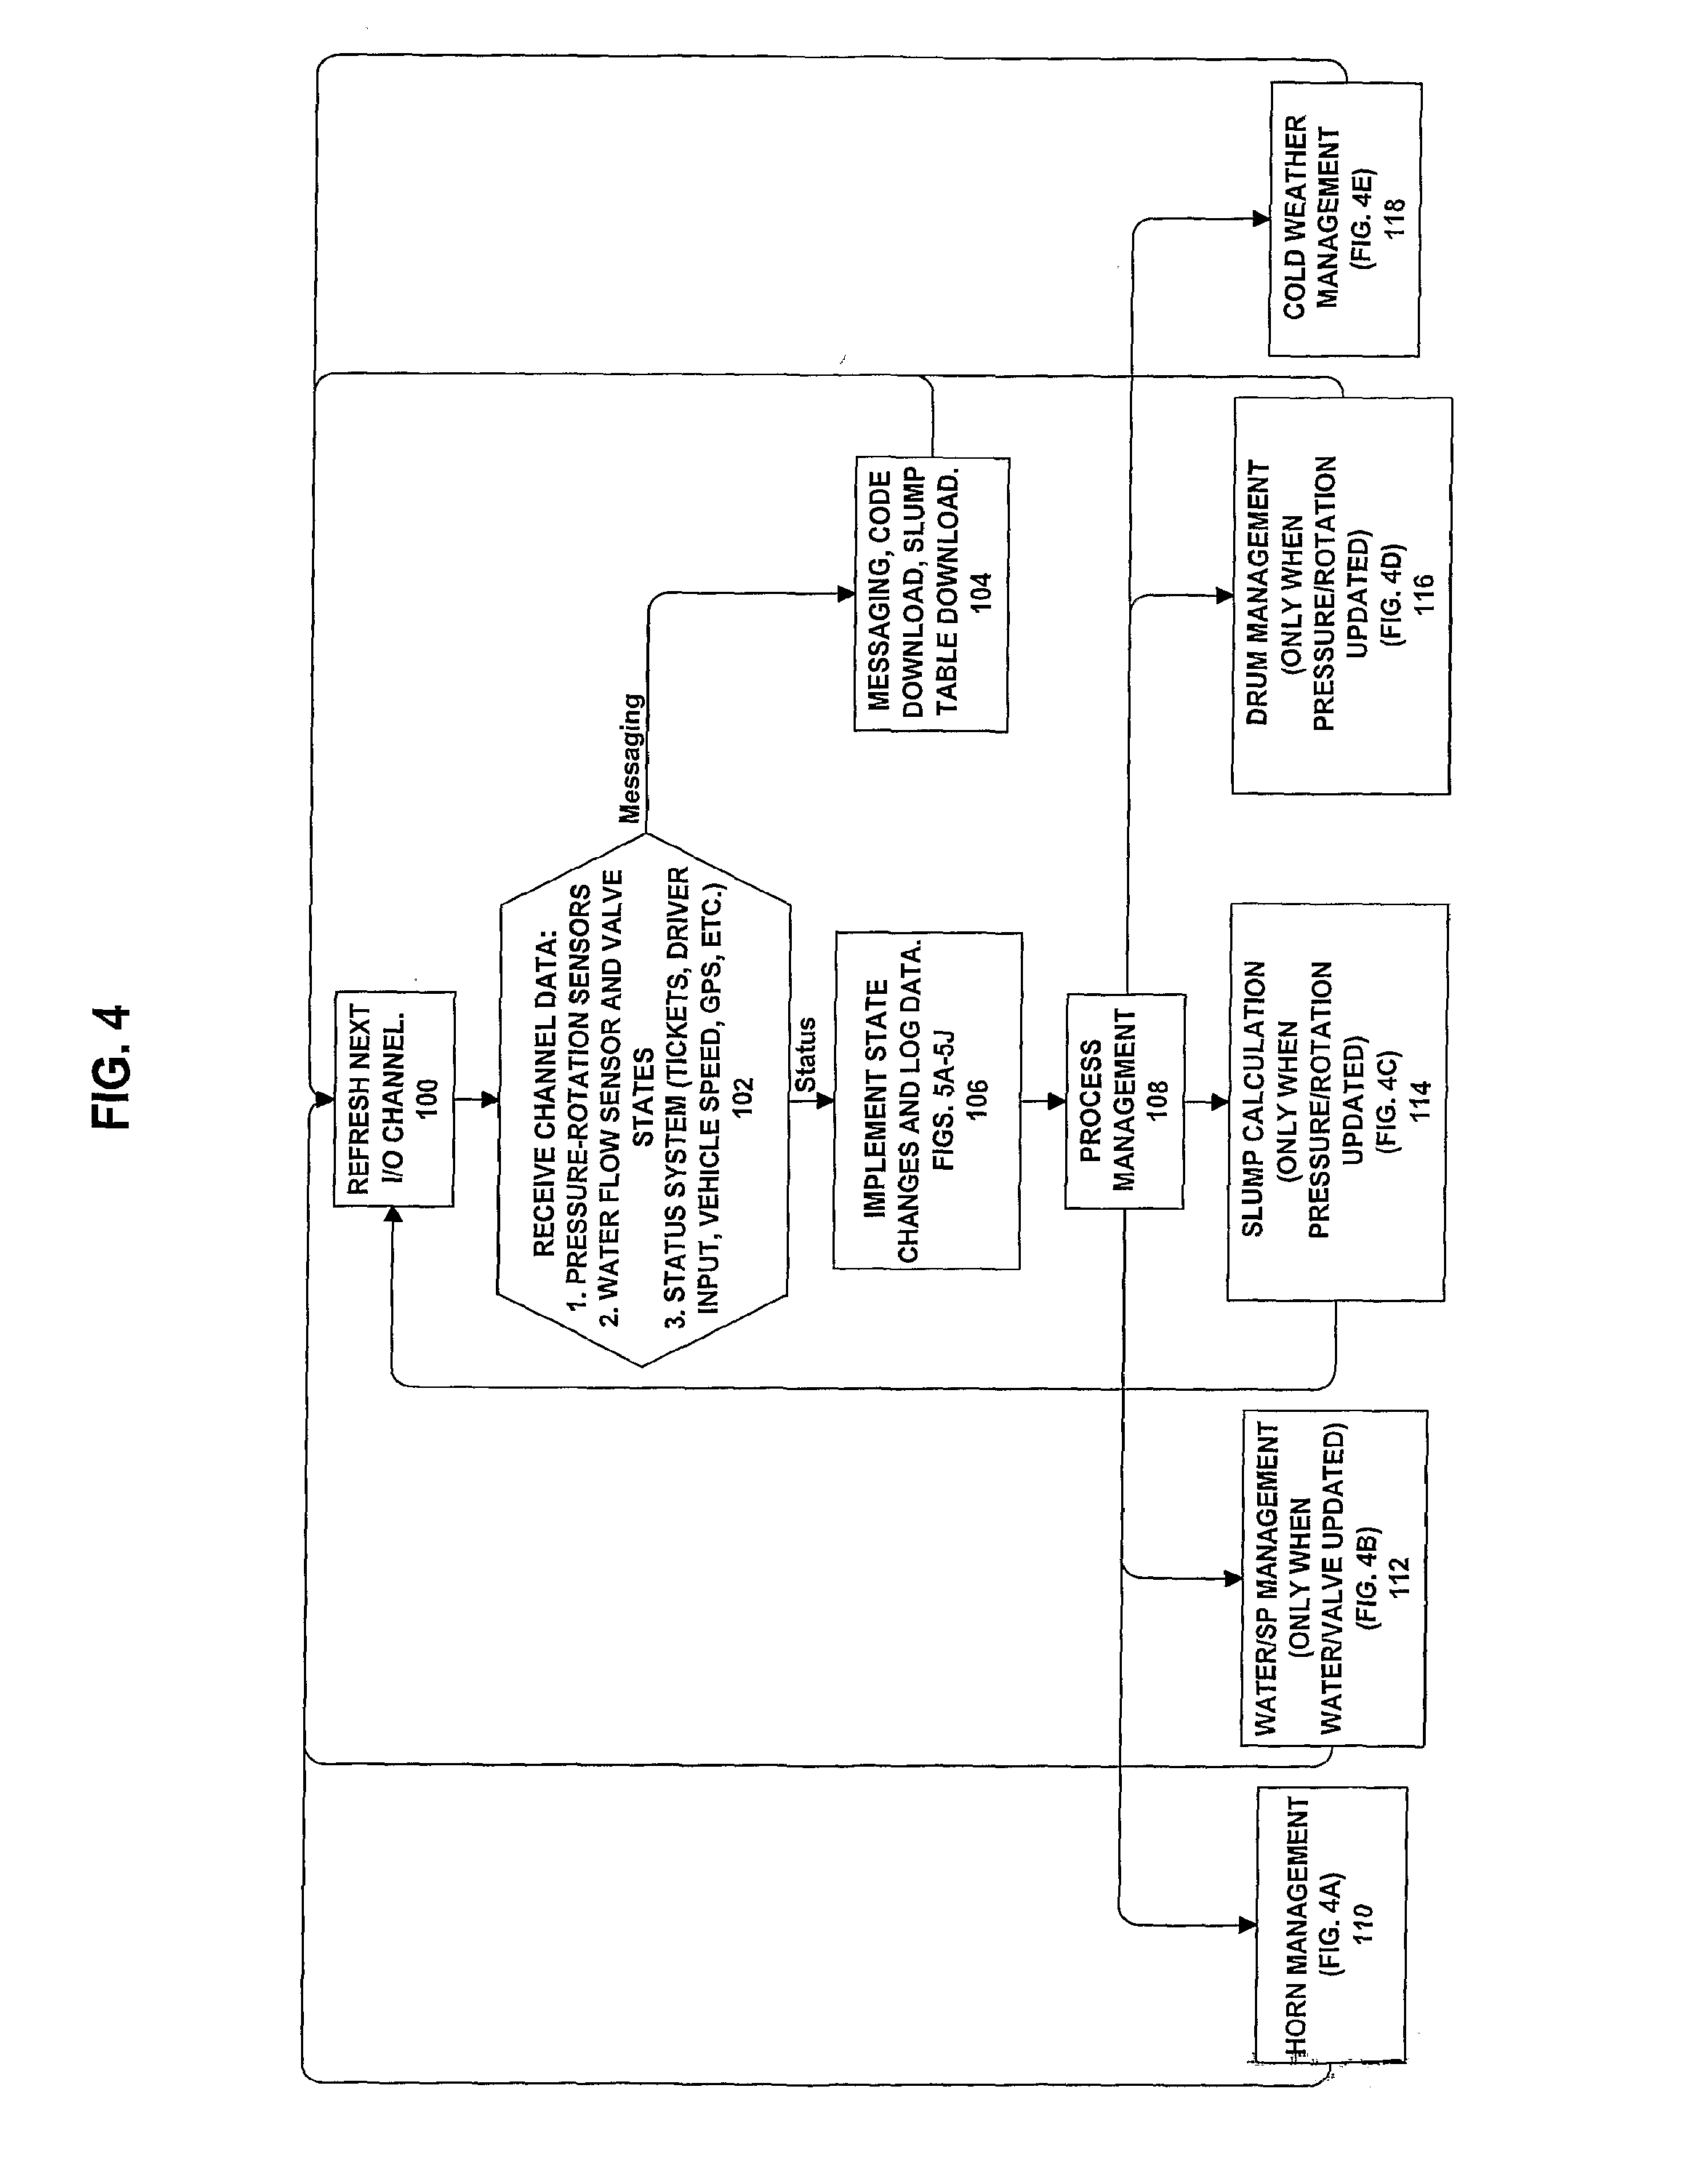 Method and System for Calculating and Reporting Slump in Delivery Vehicles